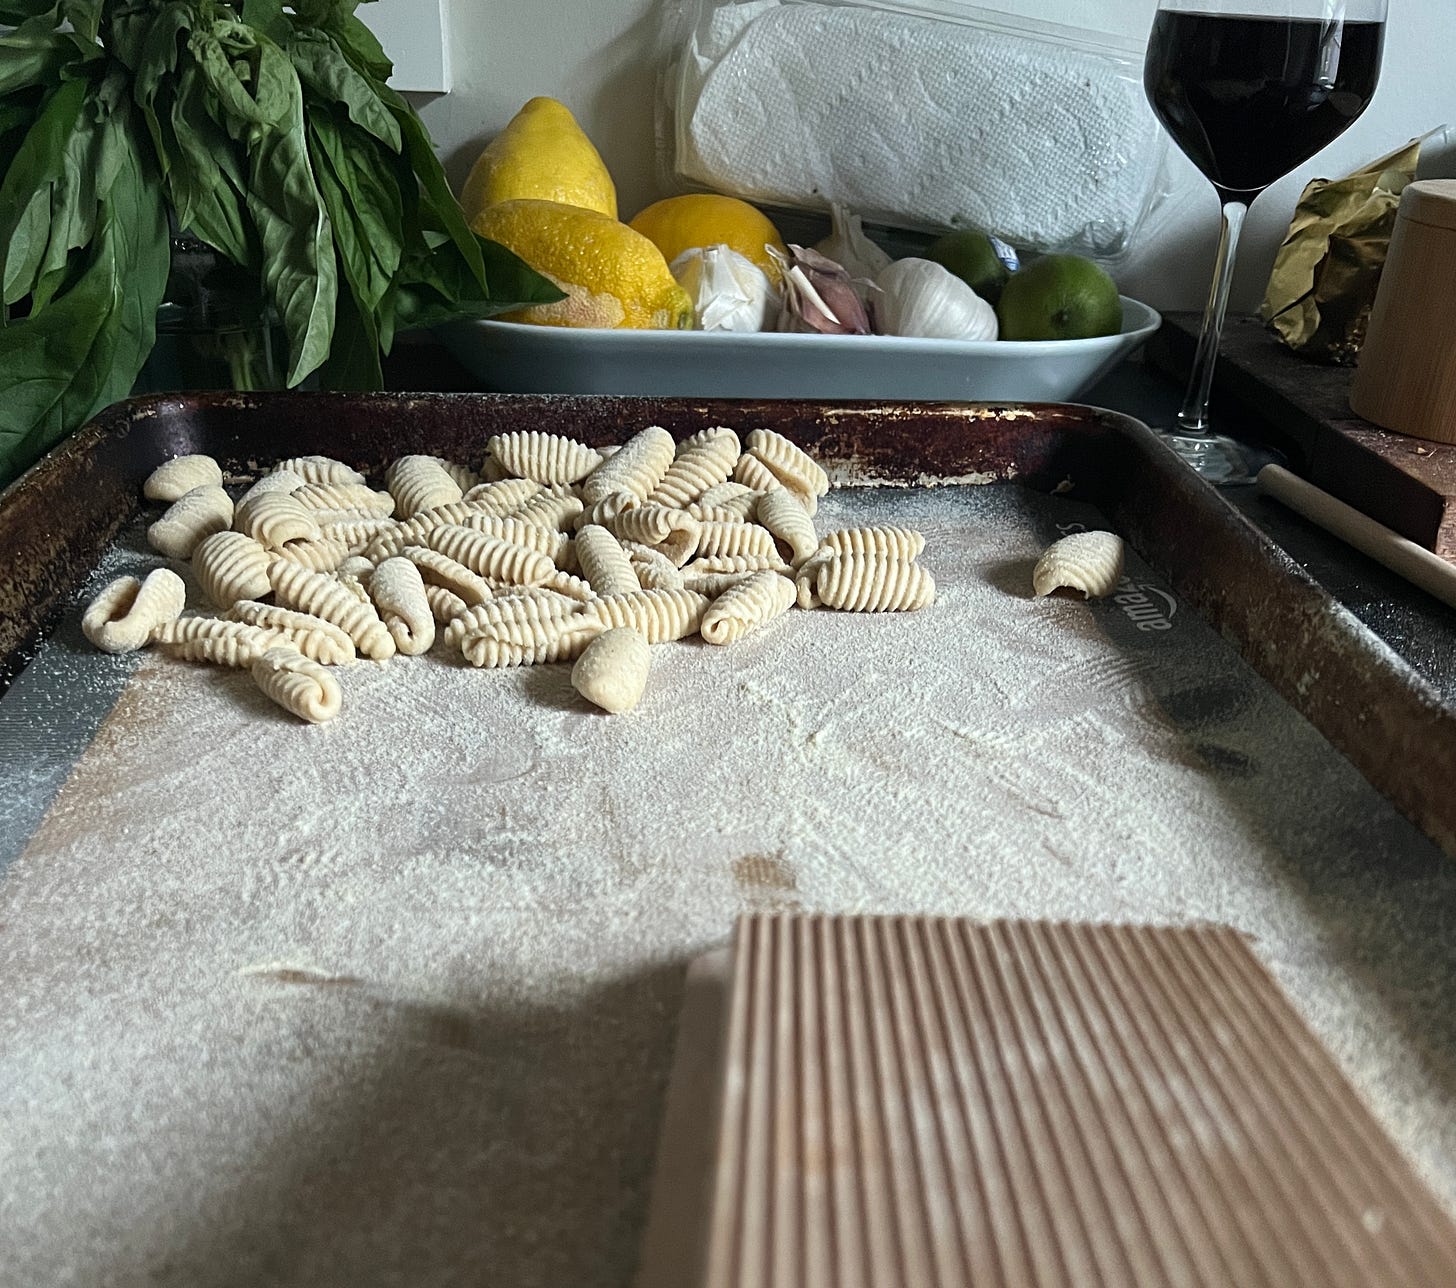 ridged cavatellli on a sheet pan in front of a wooden pasta rolling board